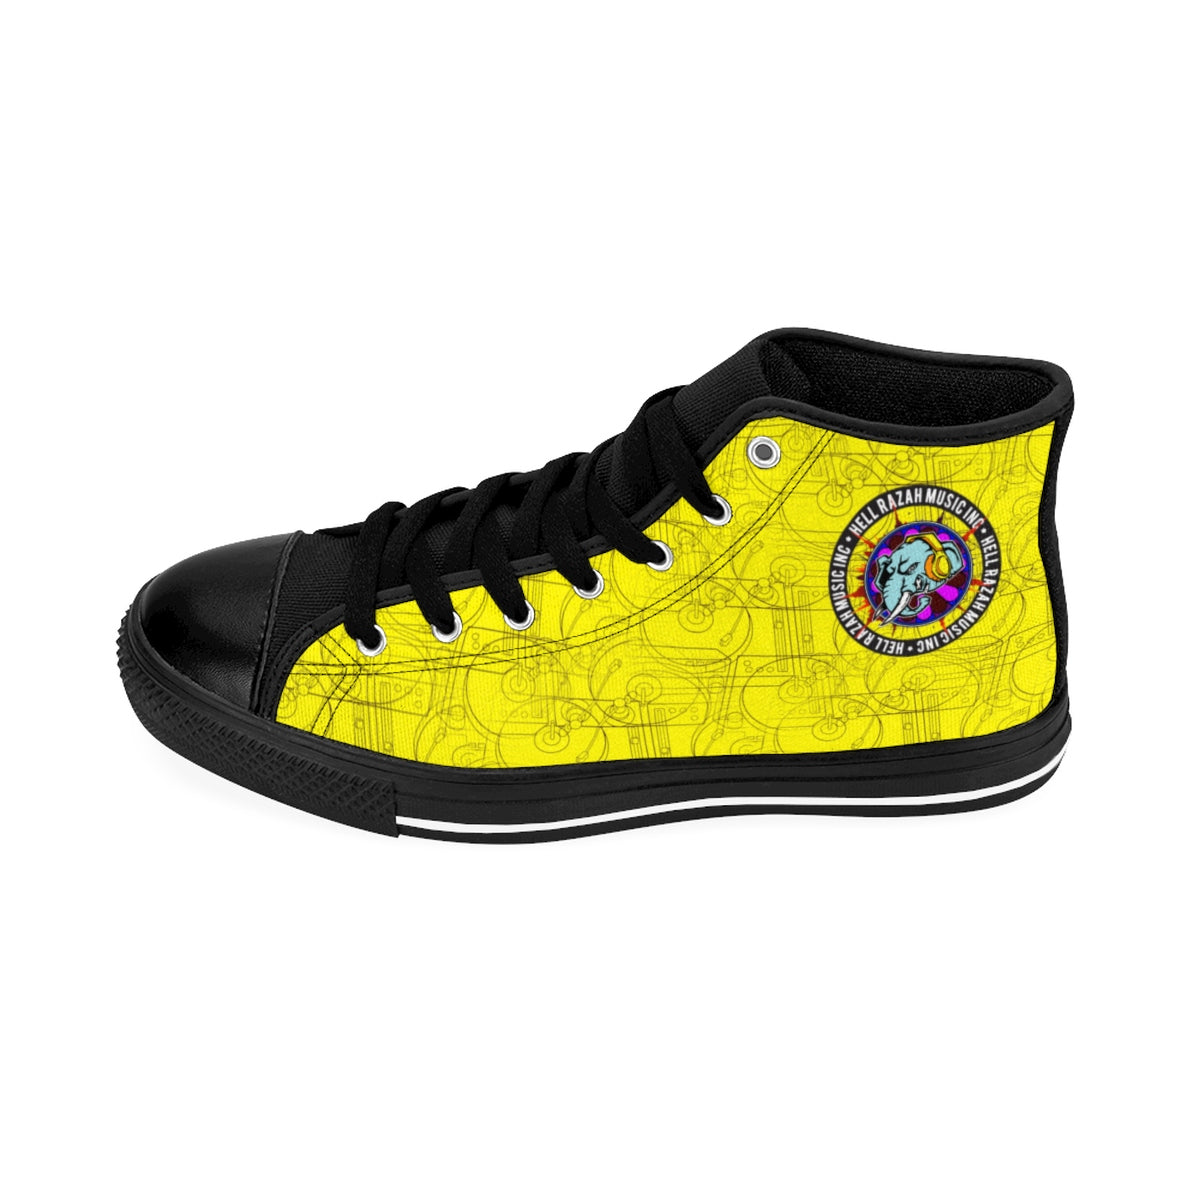 Official HellRazah Music Inc. Hannibal’s Superweapon: The War Elephant Sneakers Men's High-top Shoes HeavenRazah Merch Graphics by iHustle365